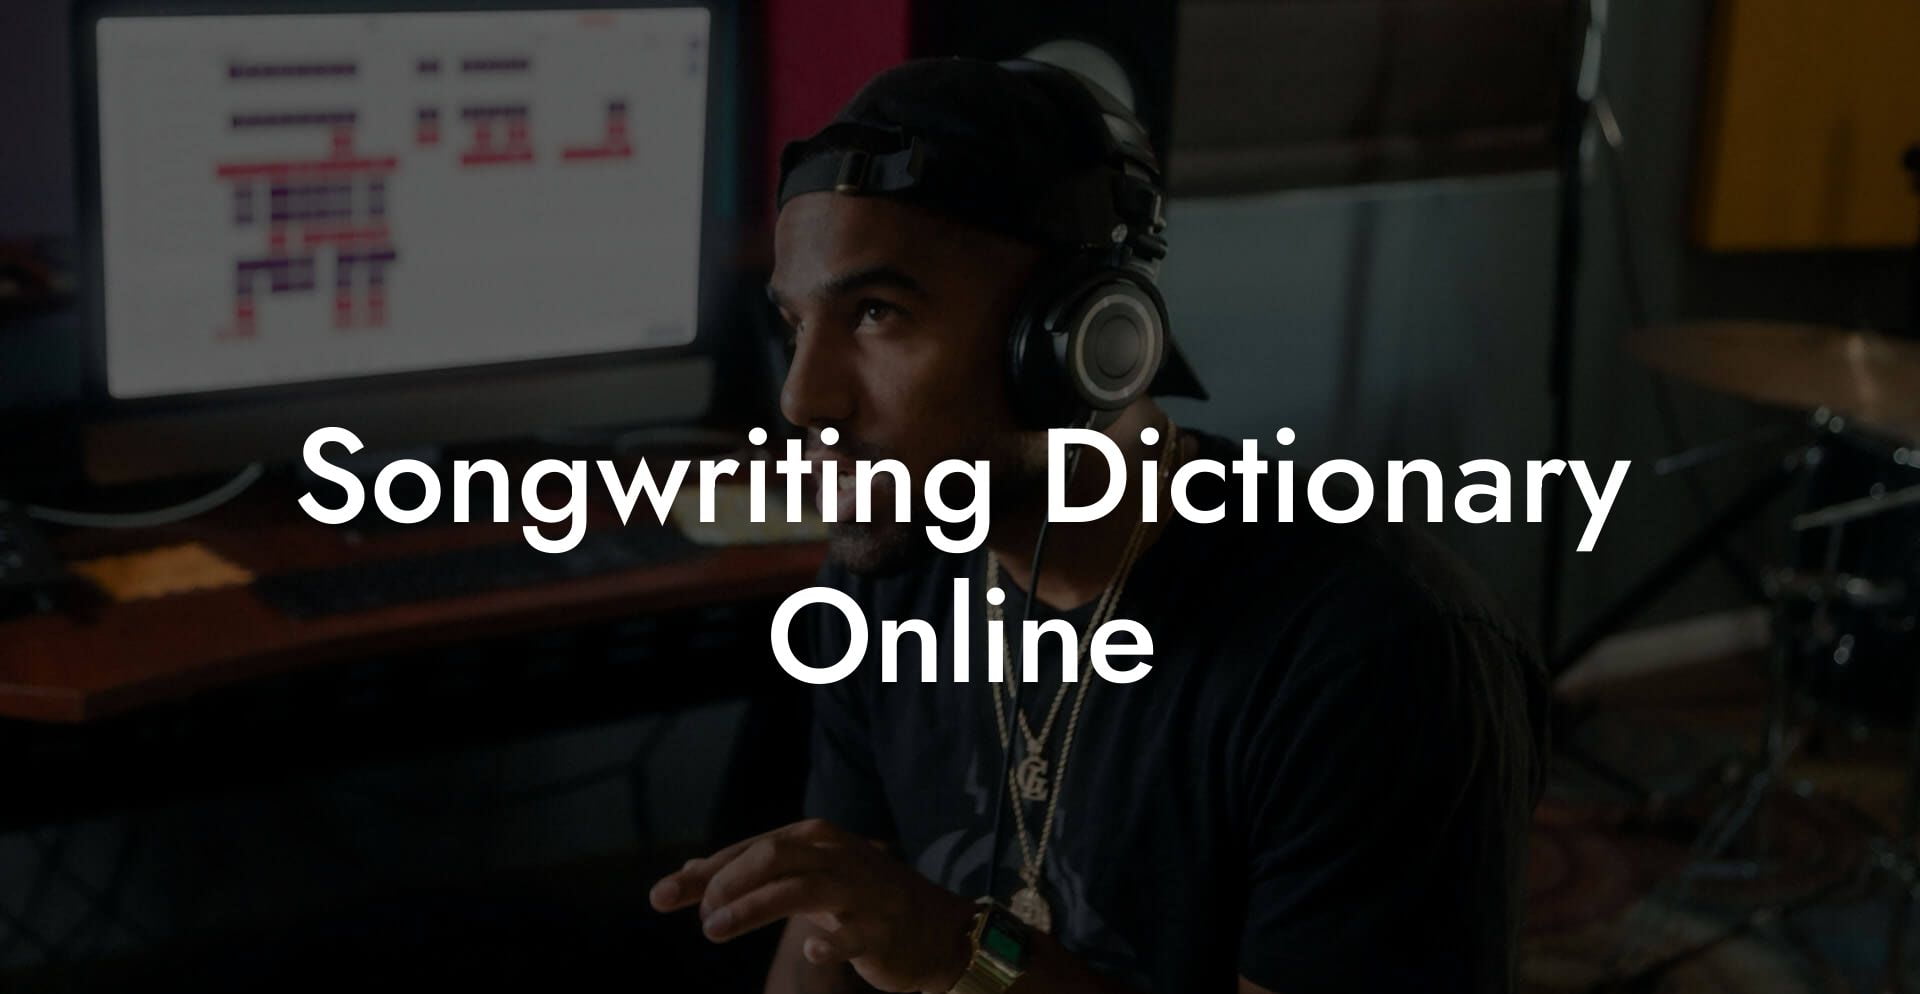 songwriting dictionary online lyric assistant